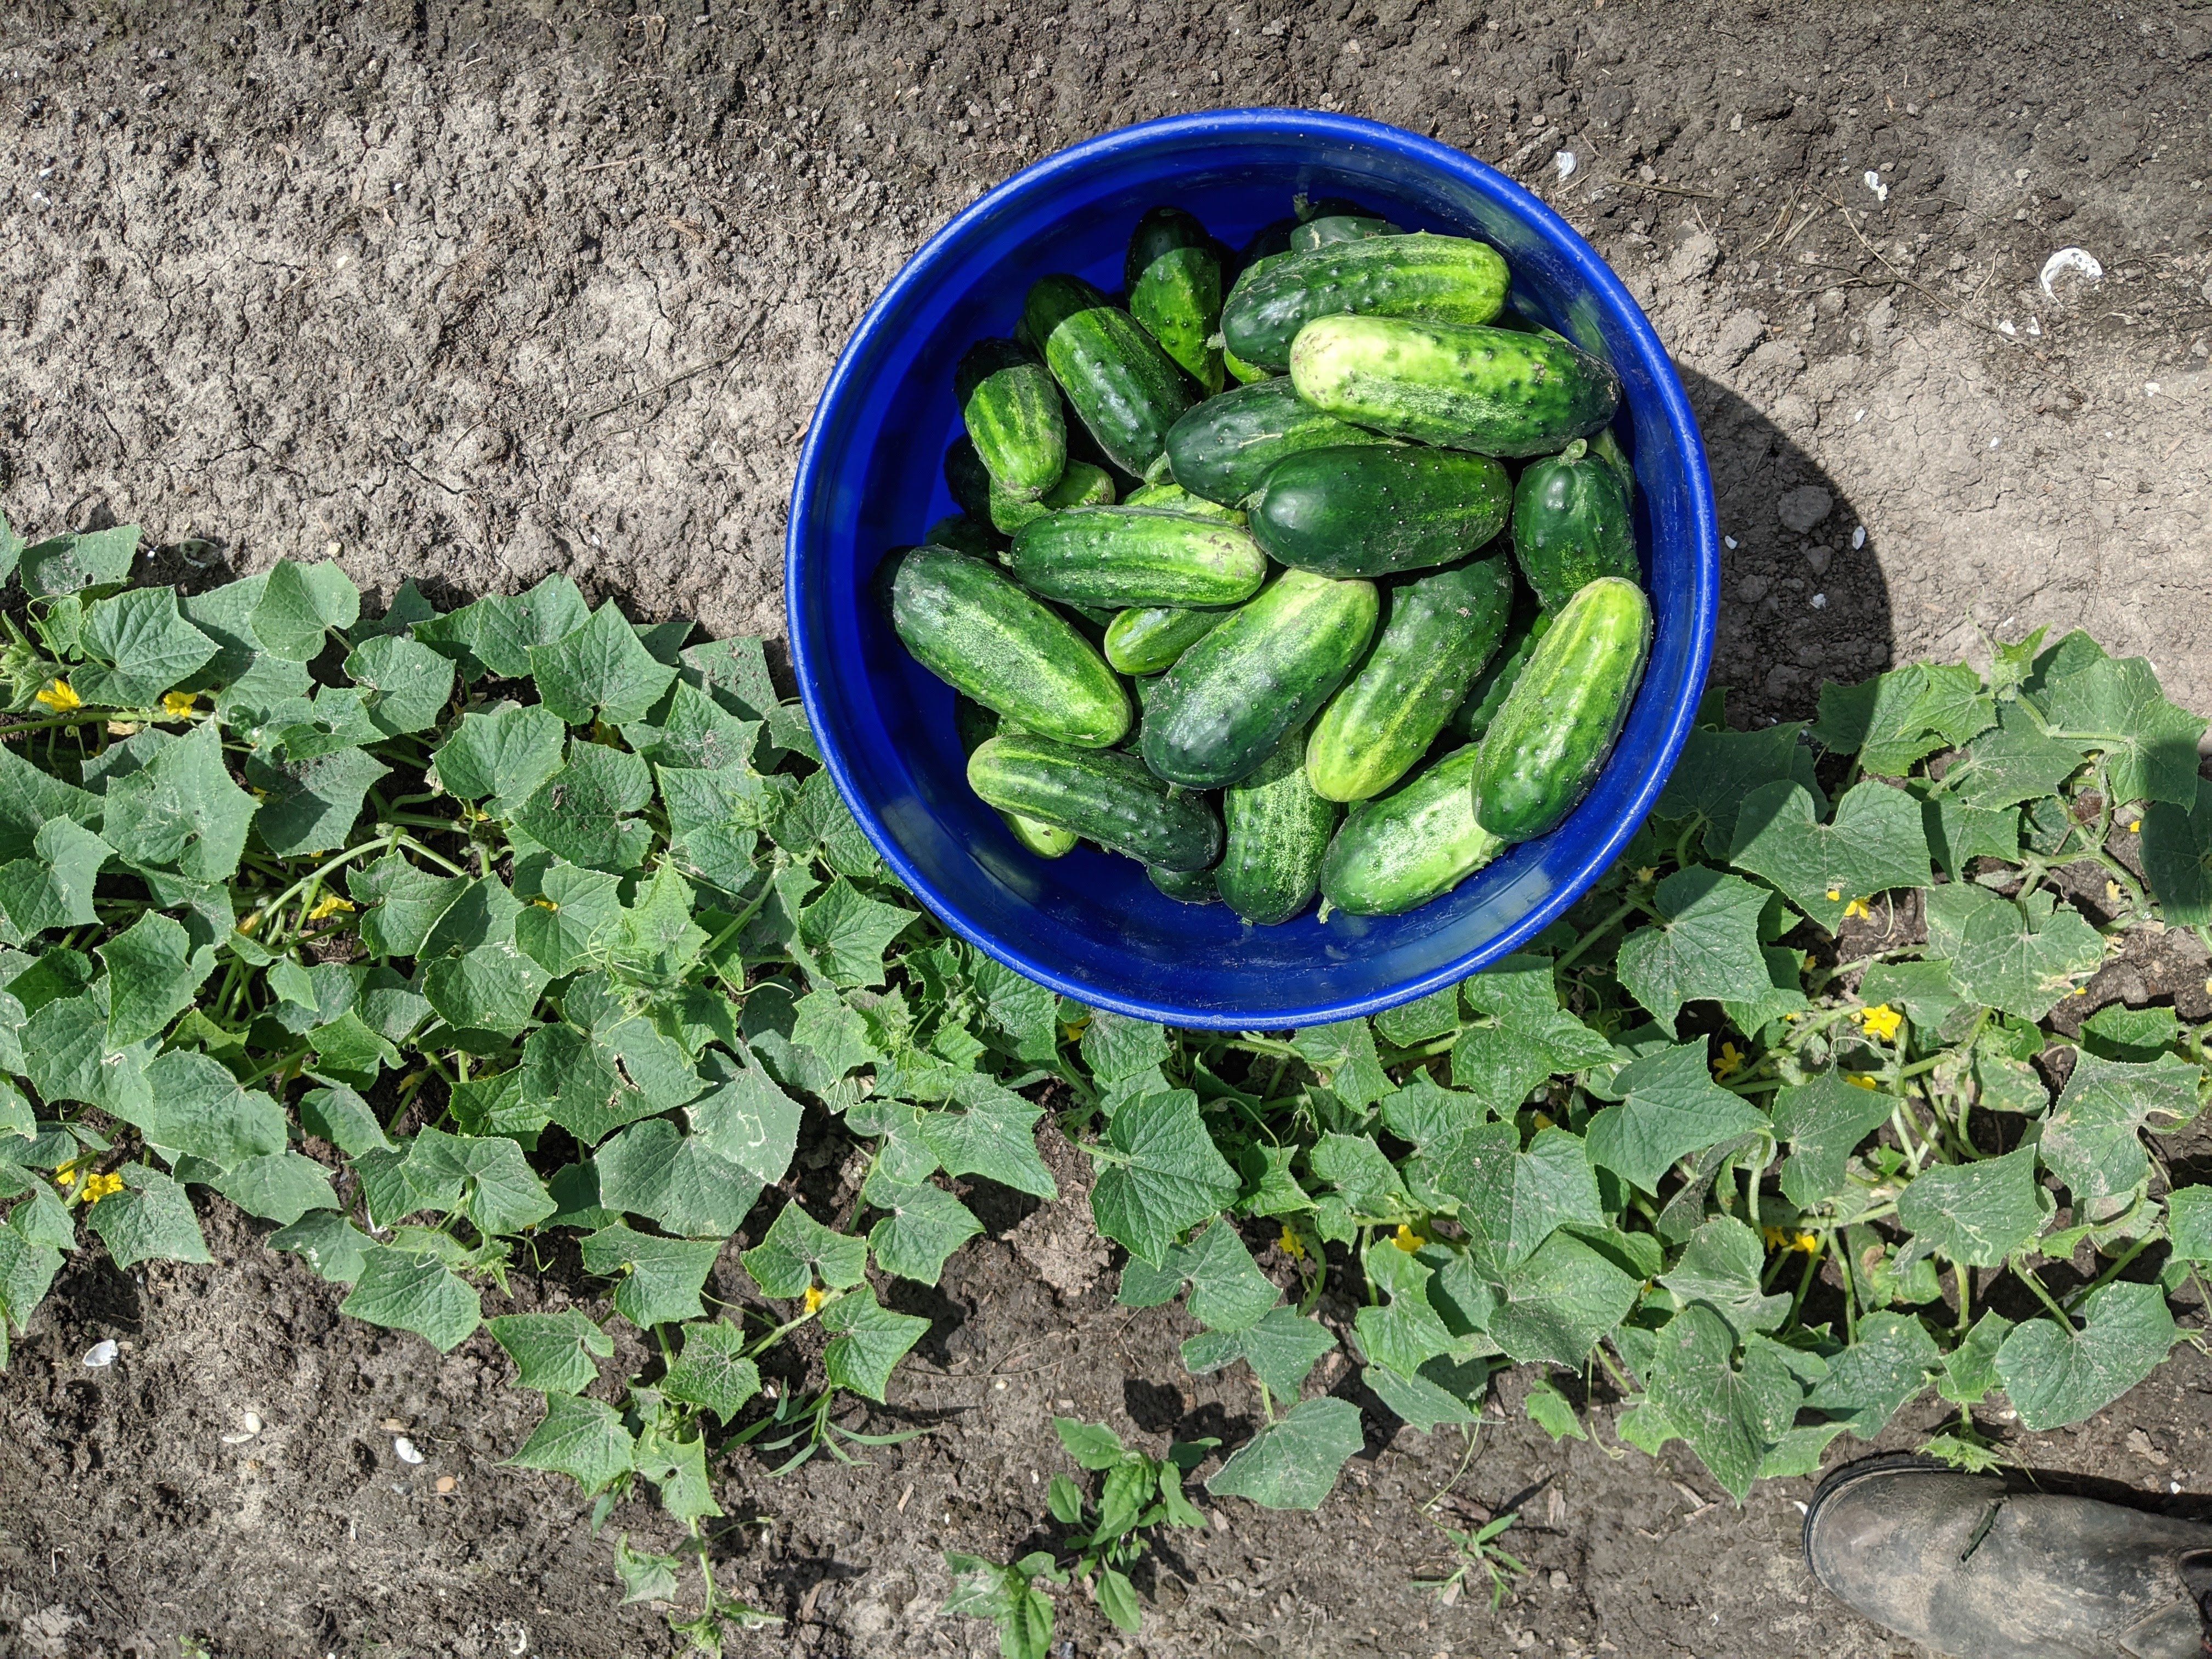 Next Happening: Pickling Cukes are King